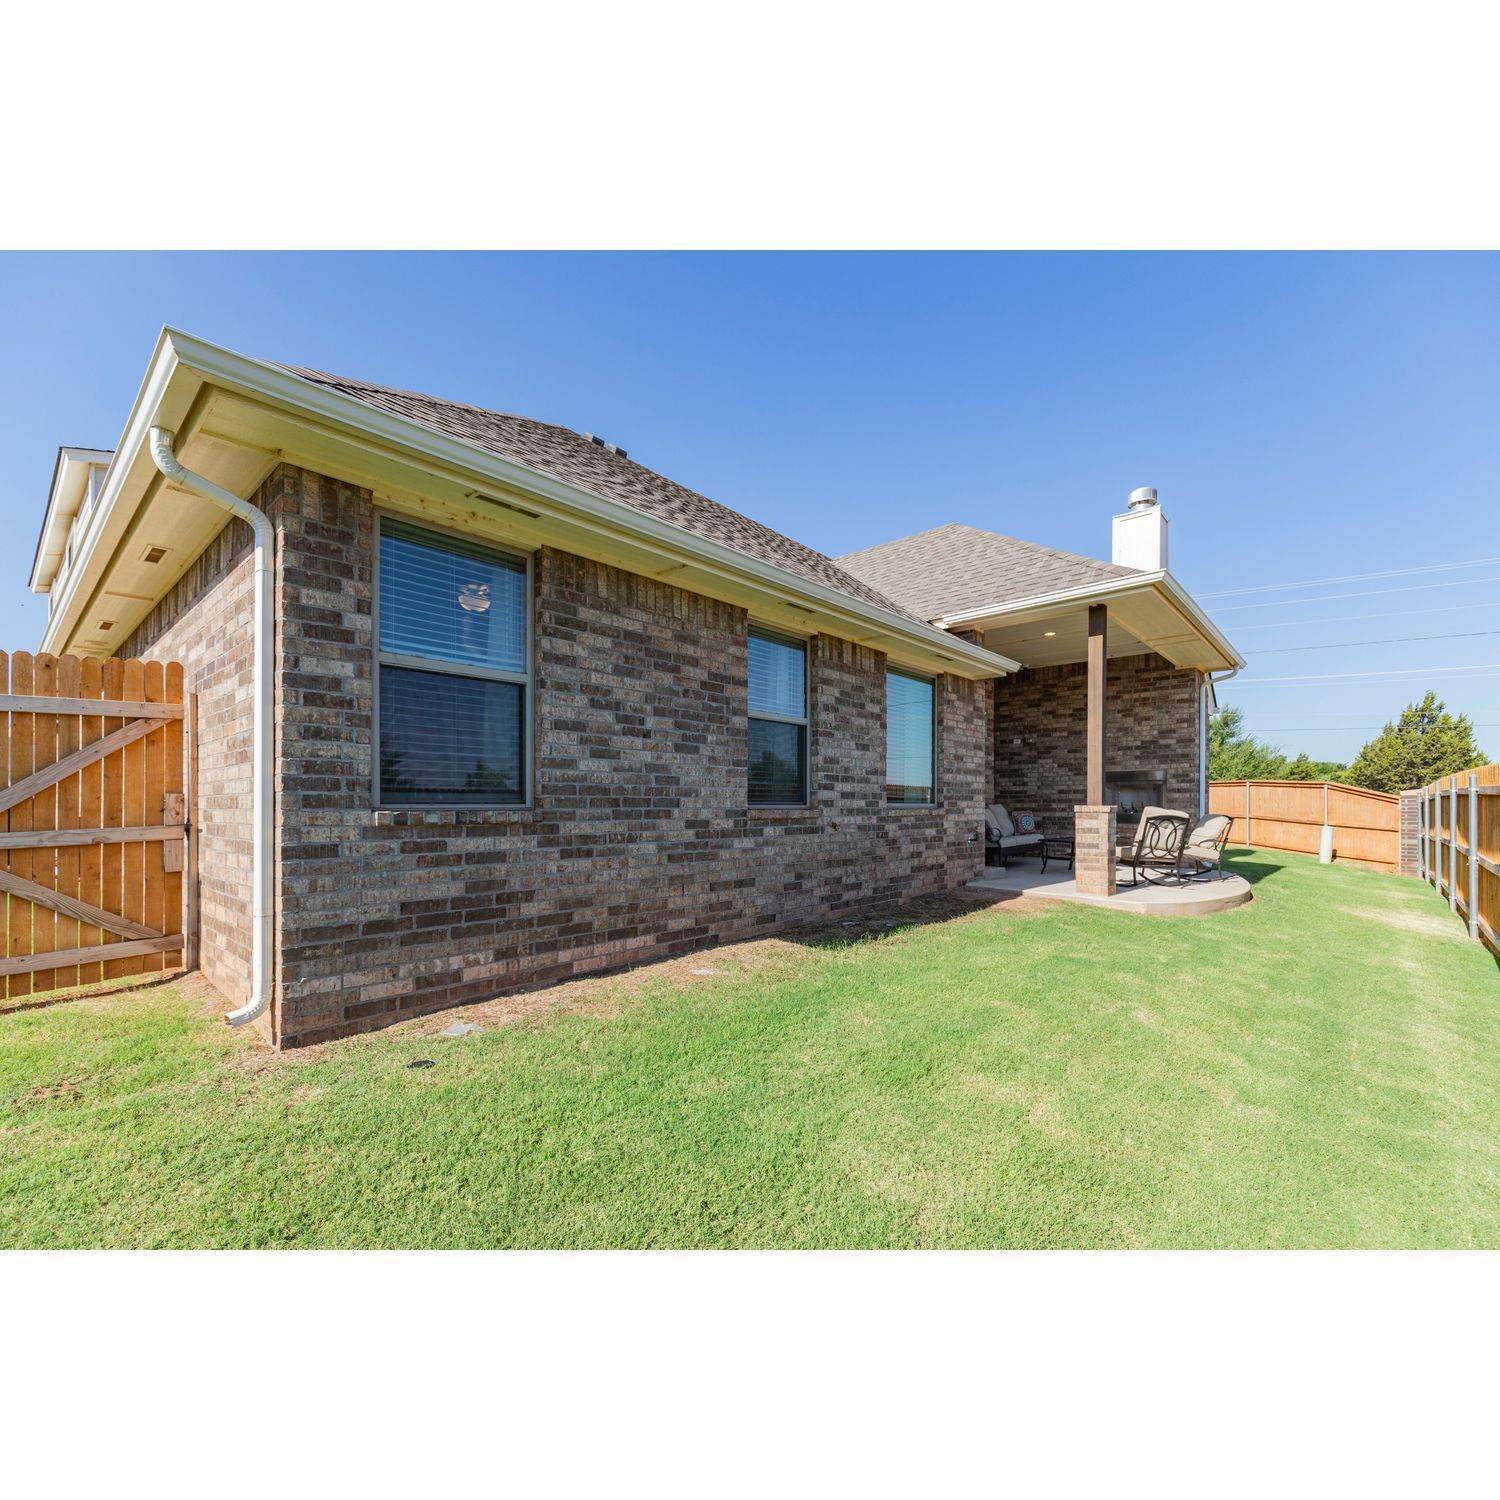 44. Canyons建於 10533 SW 52nd St, Mustang, OK 73064